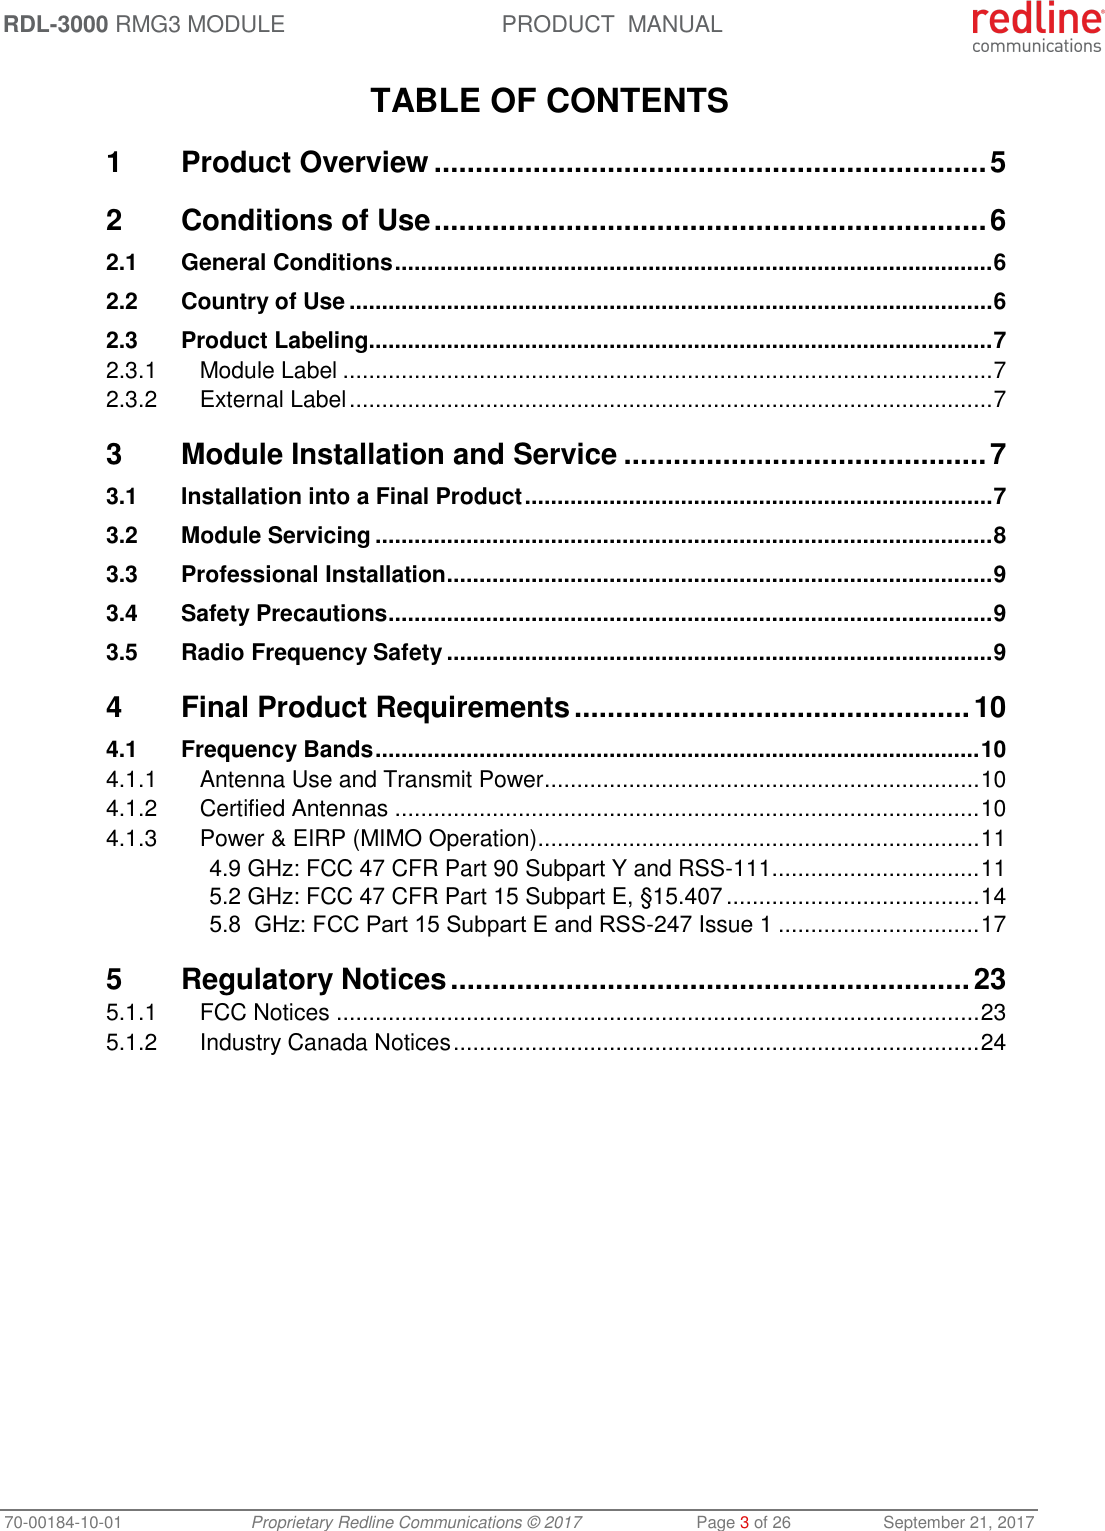 RDL-3000 RMG3 MODULE PRODUCT  MANUAL 70-00184-10-01 Proprietary Redline Communications © 2017  Page 3 of 26  September 21, 2017  TABLE OF CONTENTS 1 Product Overview ................................................................... 5 2 Conditions of Use ................................................................... 6 2.1 General Conditions ............................................................................................ 6 2.2 Country of Use ................................................................................................... 6 2.3 Product Labeling ................................................................................................ 7 2.3.1 Module Label .................................................................................................... 7 2.3.2 External Label ................................................................................................... 7 3 Module Installation and Service ............................................ 7 3.1 Installation into a Final Product ........................................................................ 7 3.2 Module Servicing ............................................................................................... 8 3.3 Professional Installation .................................................................................... 9 3.4 Safety Precautions ............................................................................................. 9 3.5 Radio Frequency Safety .................................................................................... 9 4 Final Product Requirements ................................................ 10 4.1 Frequency Bands ............................................................................................. 10 4.1.1 Antenna Use and Transmit Power ................................................................... 10 4.1.2 Certified Antennas .......................................................................................... 10 4.1.3 Power &amp; EIRP (MIMO Operation) .................................................................... 11 4.9 GHz: FCC 47 CFR Part 90 Subpart Y and RSS-111 ................................ 11 5.2 GHz: FCC 47 CFR Part 15 Subpart E, §15.407 ....................................... 14 5.8  GHz: FCC Part 15 Subpart Е and RSS-247 Issue 1 ............................... 17 5 Regulatory Notices ............................................................... 23 5.1.1 FCC Notices ................................................................................................... 23 5.1.2 Industry Canada Notices ................................................................................. 24            